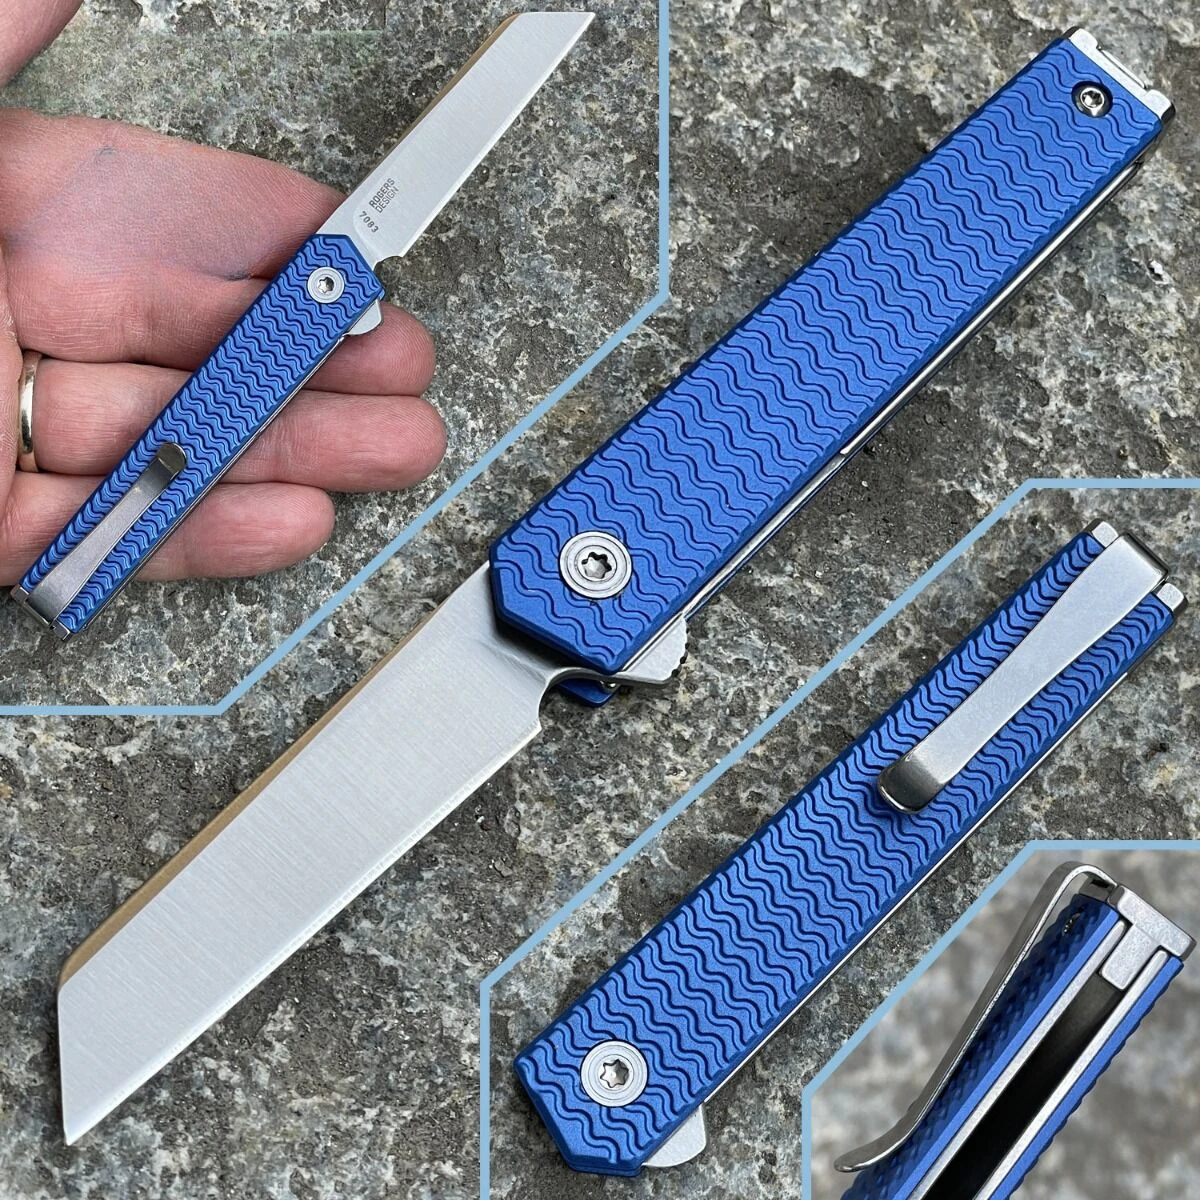 

7083 CEO Microflipper Small Folding Knife 2.21" 8Cr13Mov Sheepsfoot Blade Textured Blue 420 Steel Handle Camping Hunting Tools